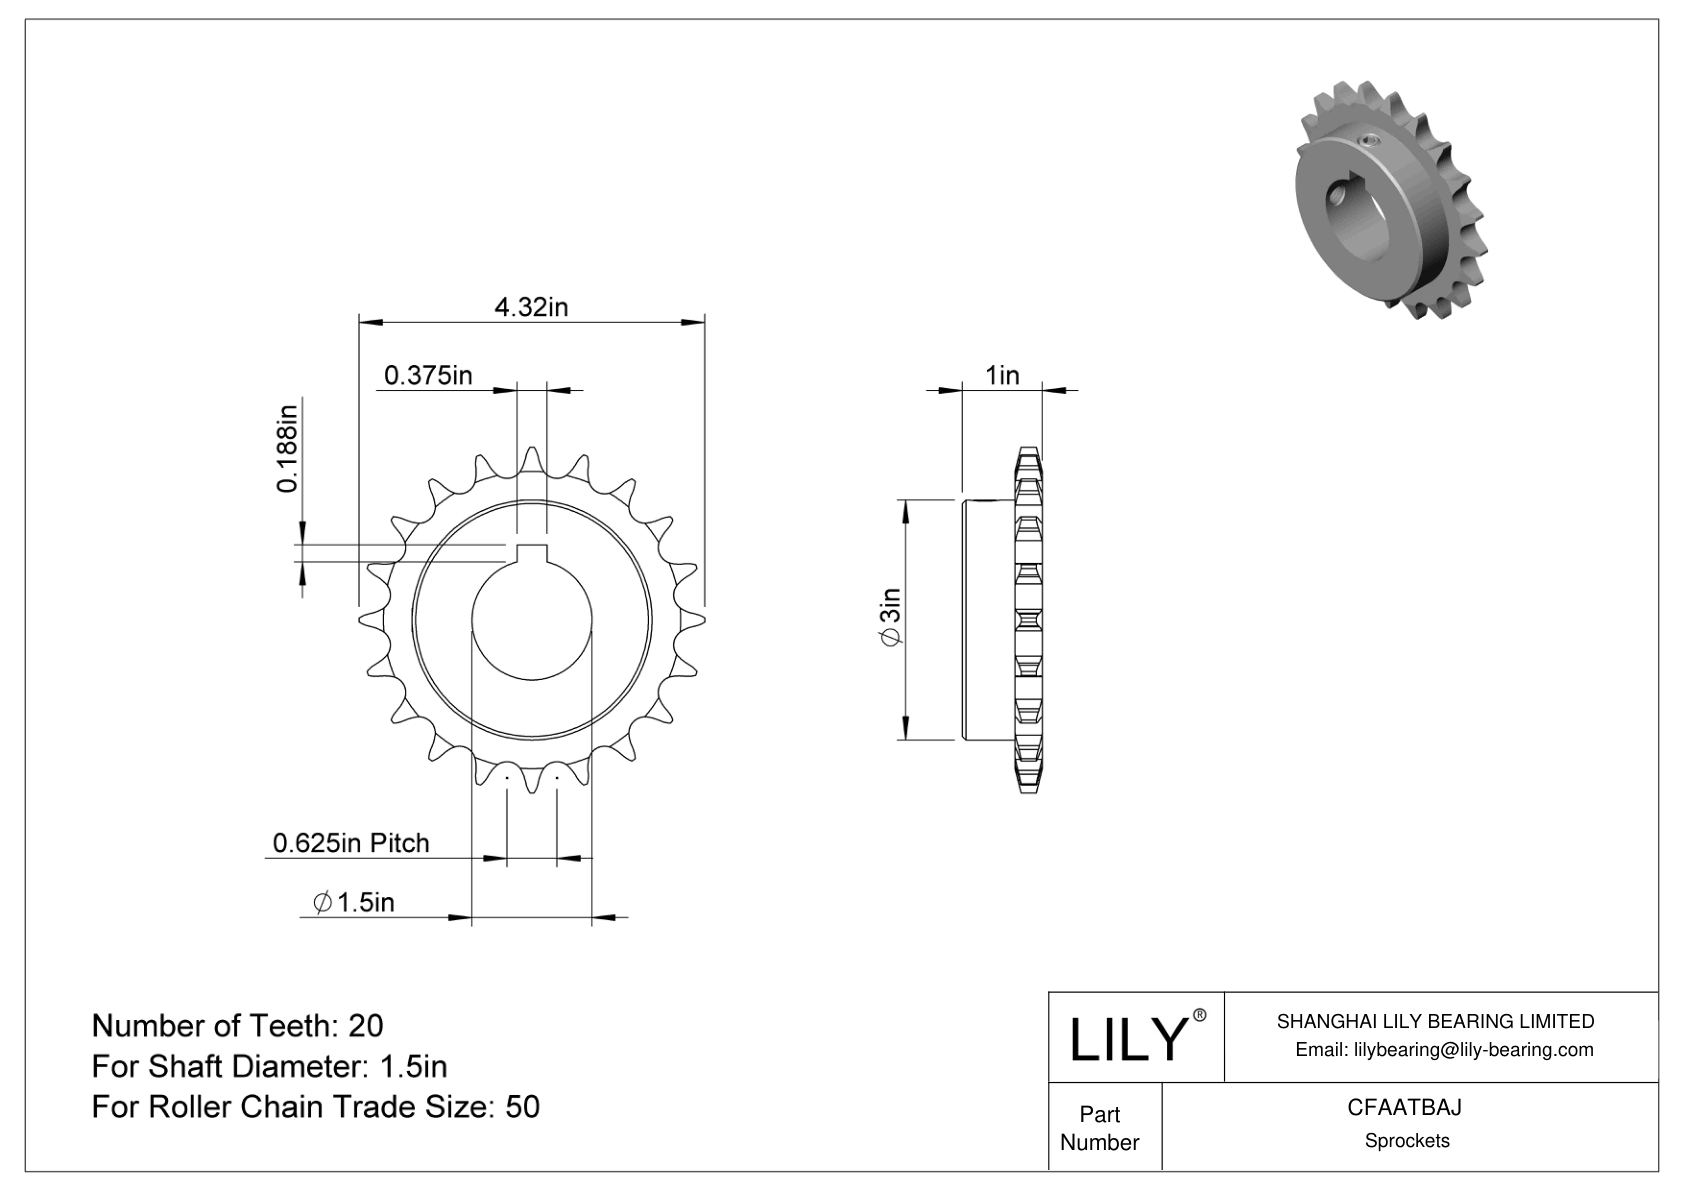 CFAATBAJ Wear-Resistant Sprockets for ANSI Roller Chain cad drawing